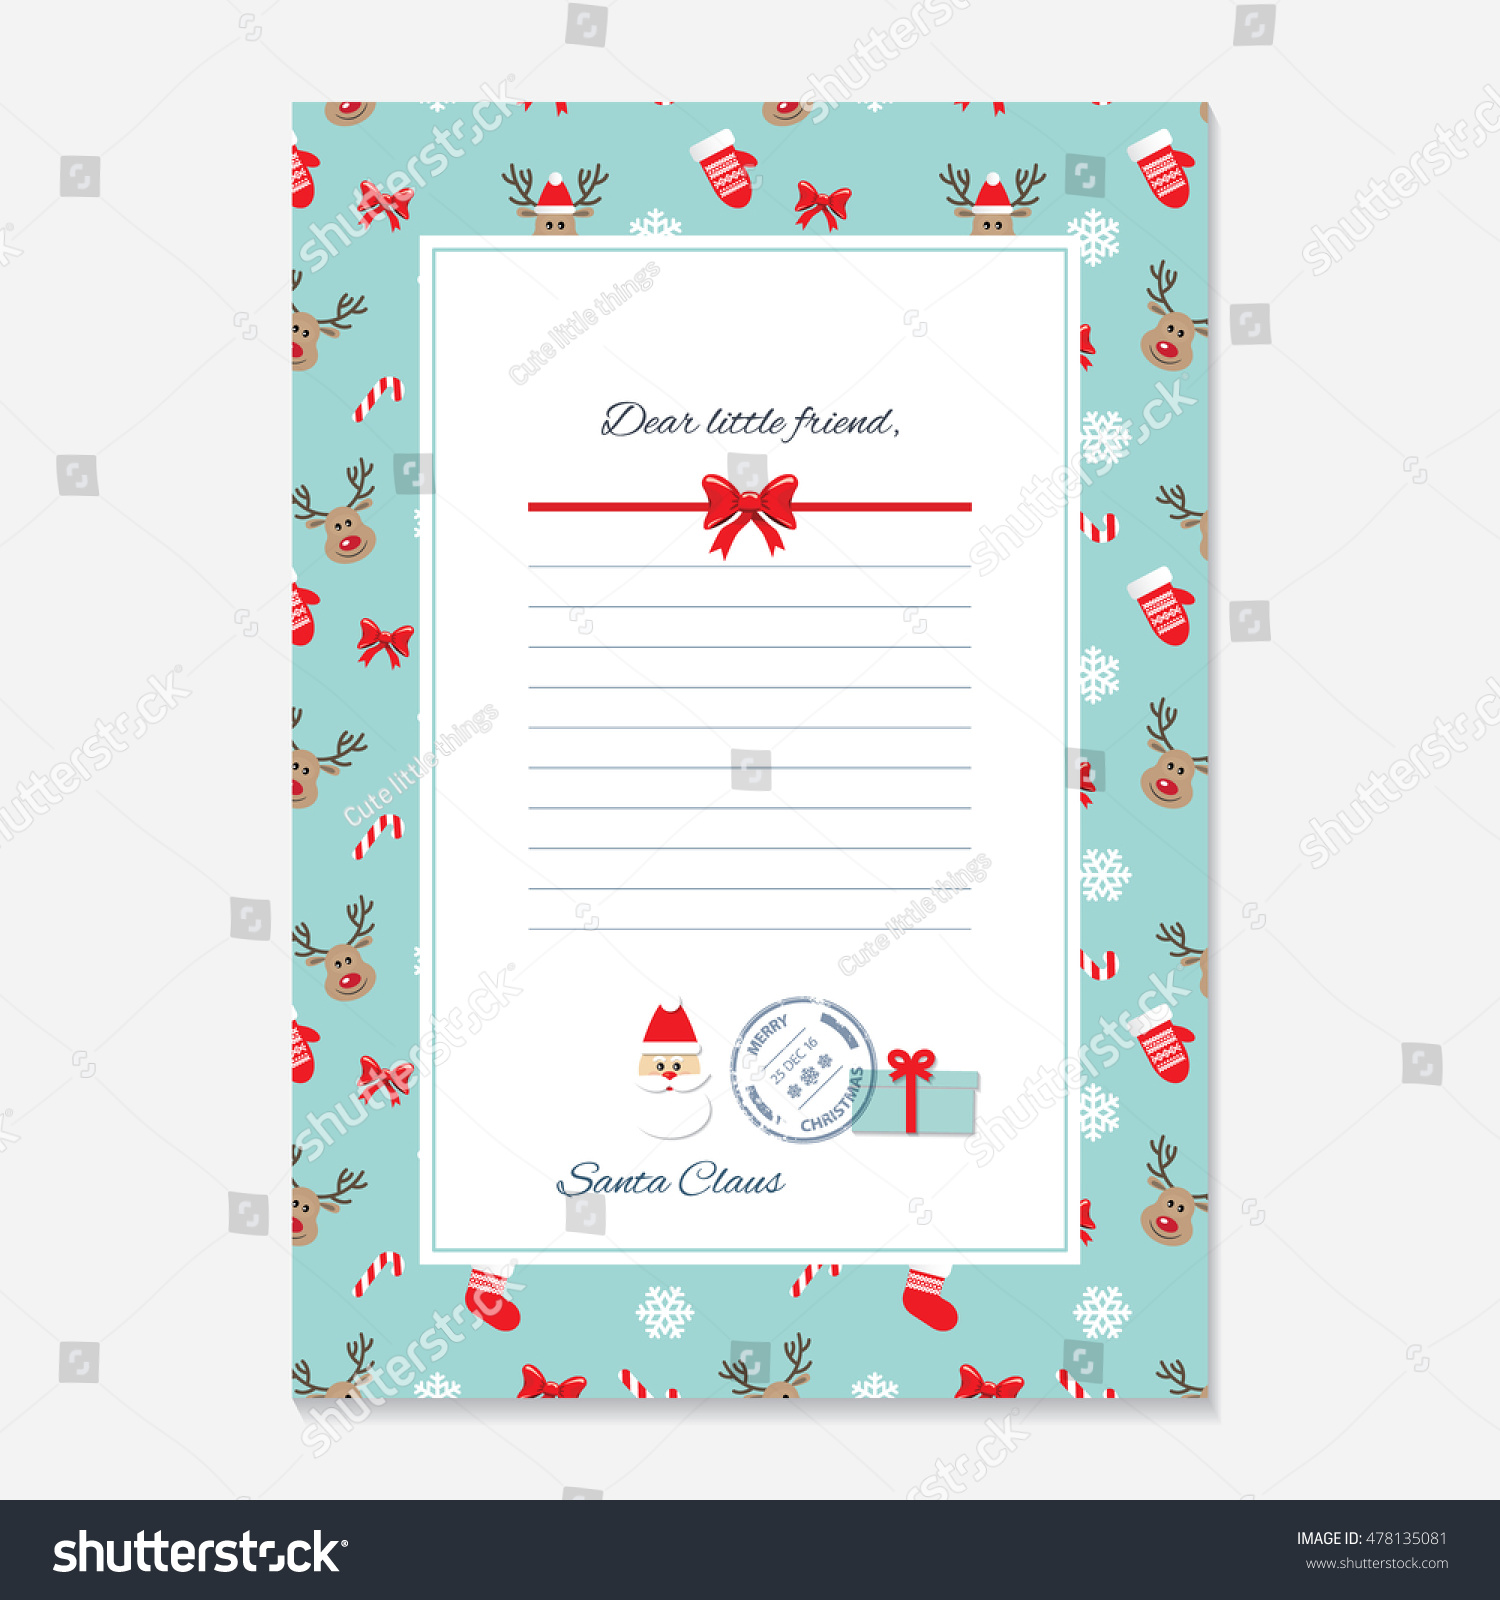 Christmas Letter Santa Claus Template Layout Stock Vector (Royalty Inside Letter From Santa Claus Template